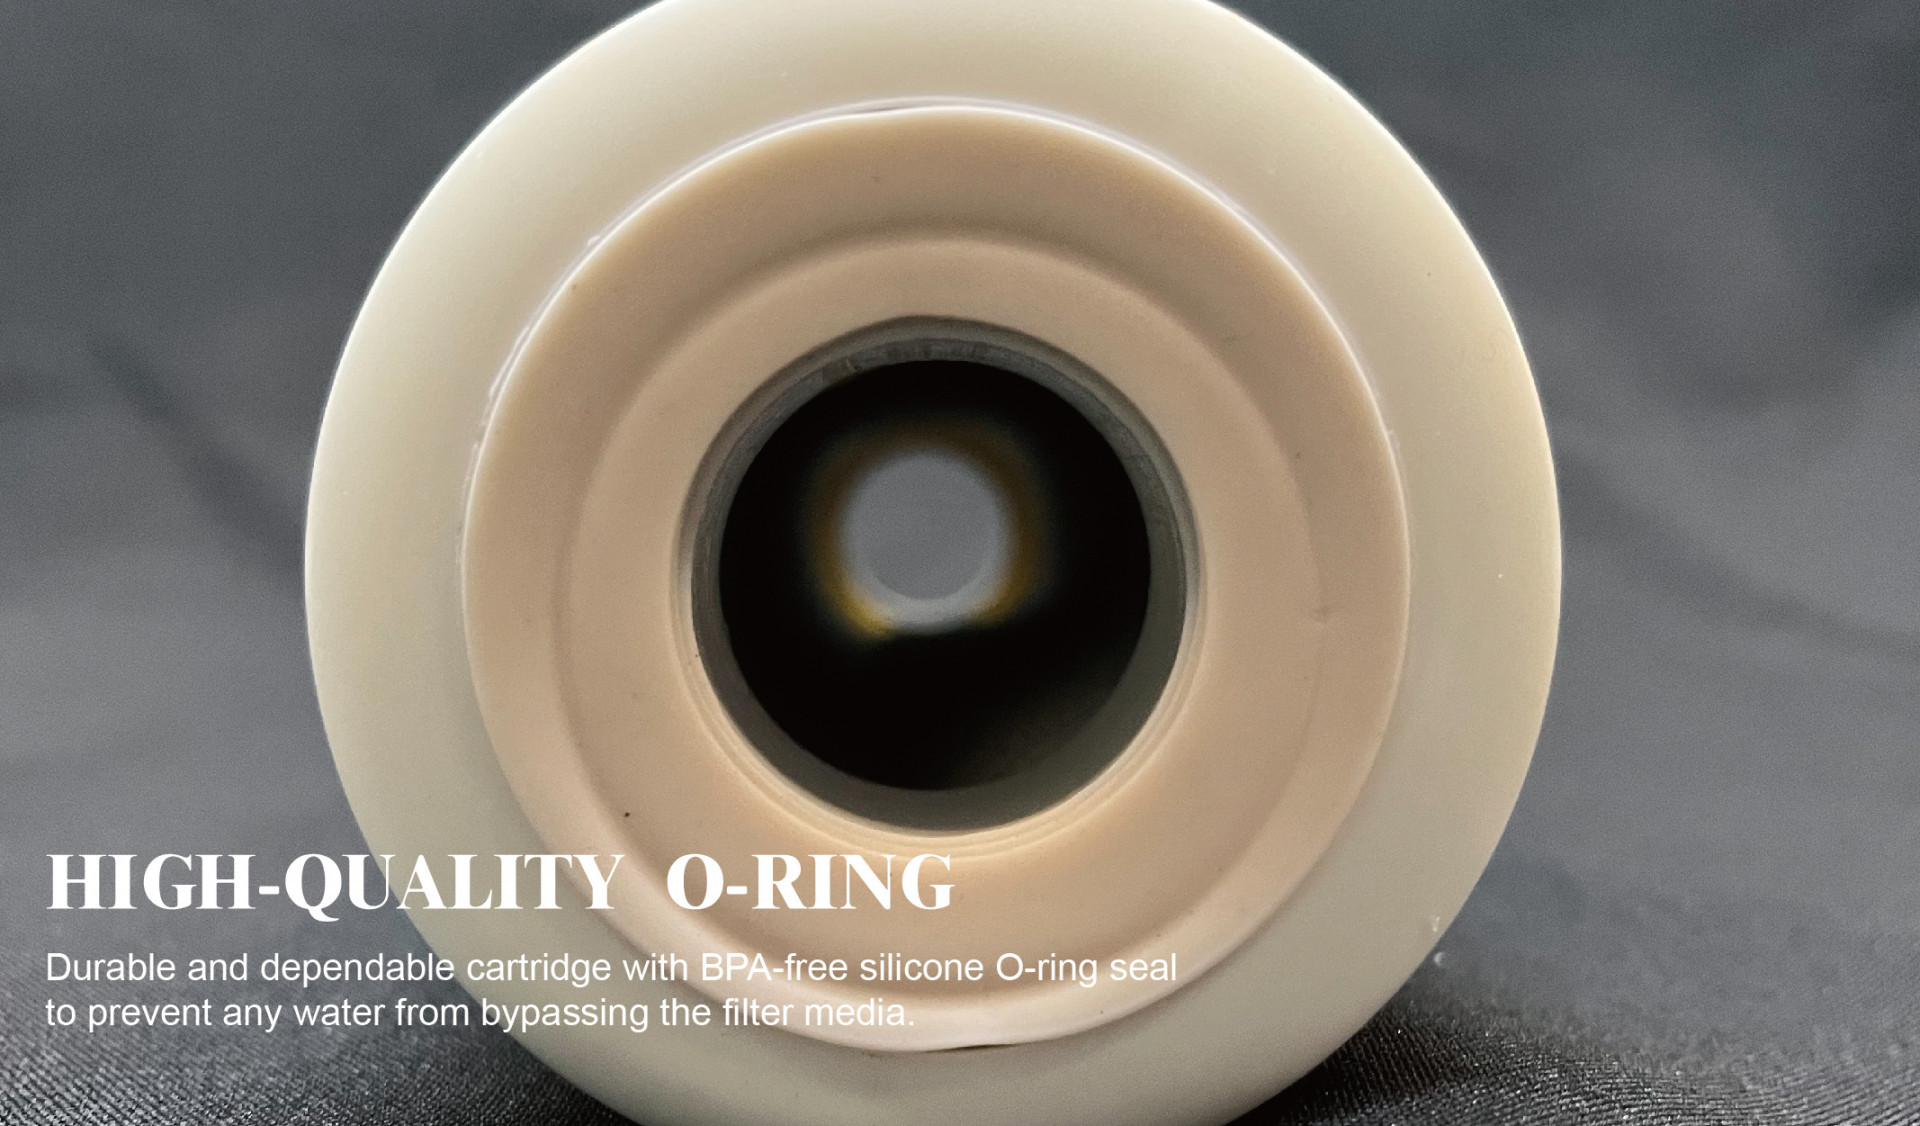 FILTER HIGH-QUALITY O-RING